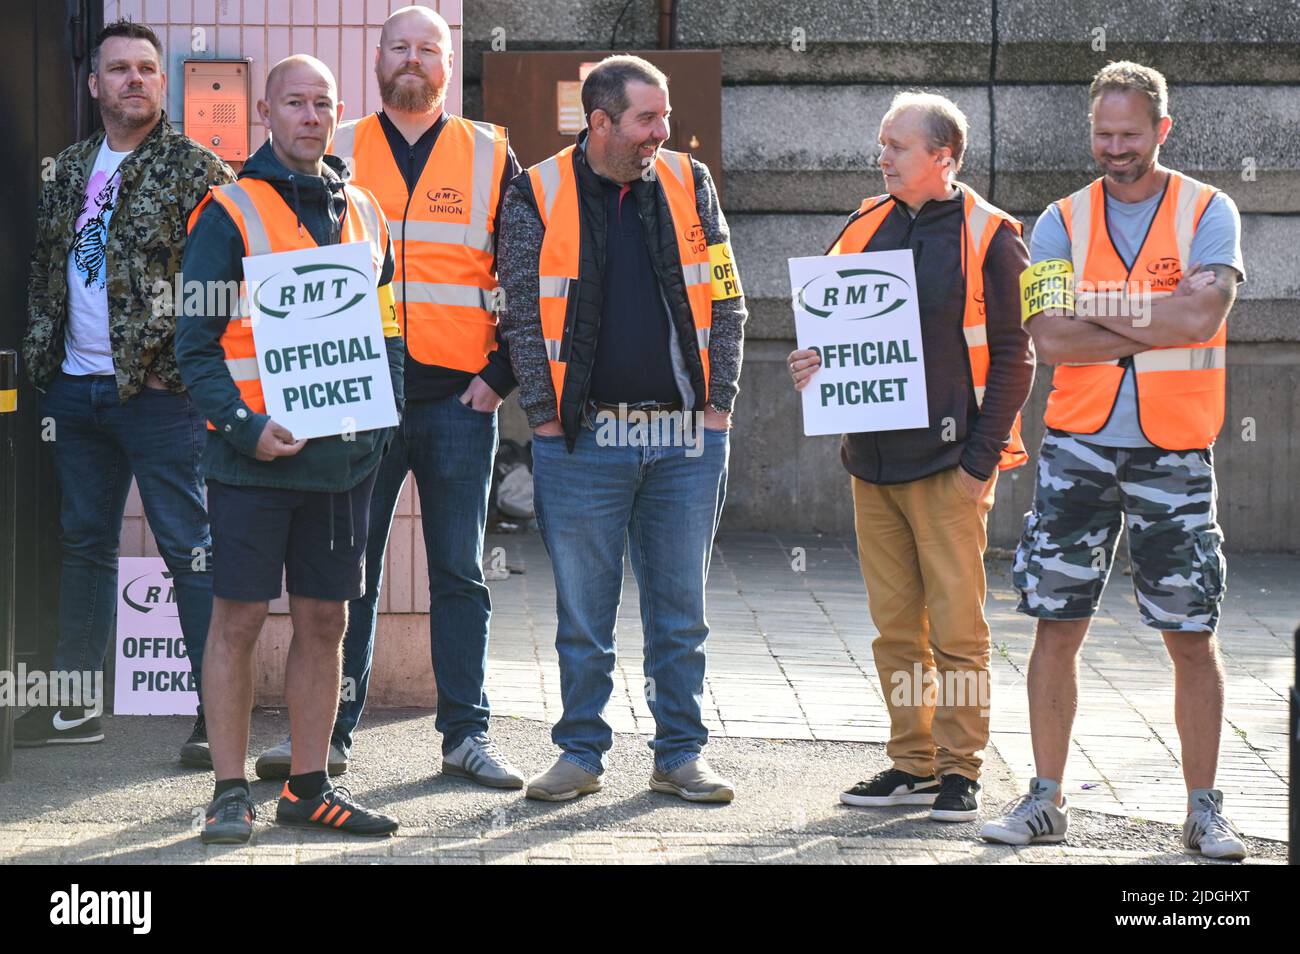 New Street, Birmingham, England, June 21st 2022. Rail workers on the picket line outside Birmingham's New Street Signal Box. They are striking for a 7 percent wage increase across the British networks after RMT Unions failed to reach an agreement. Pic by Credit: Sam Holiday/Alamy Live News Stock Photo